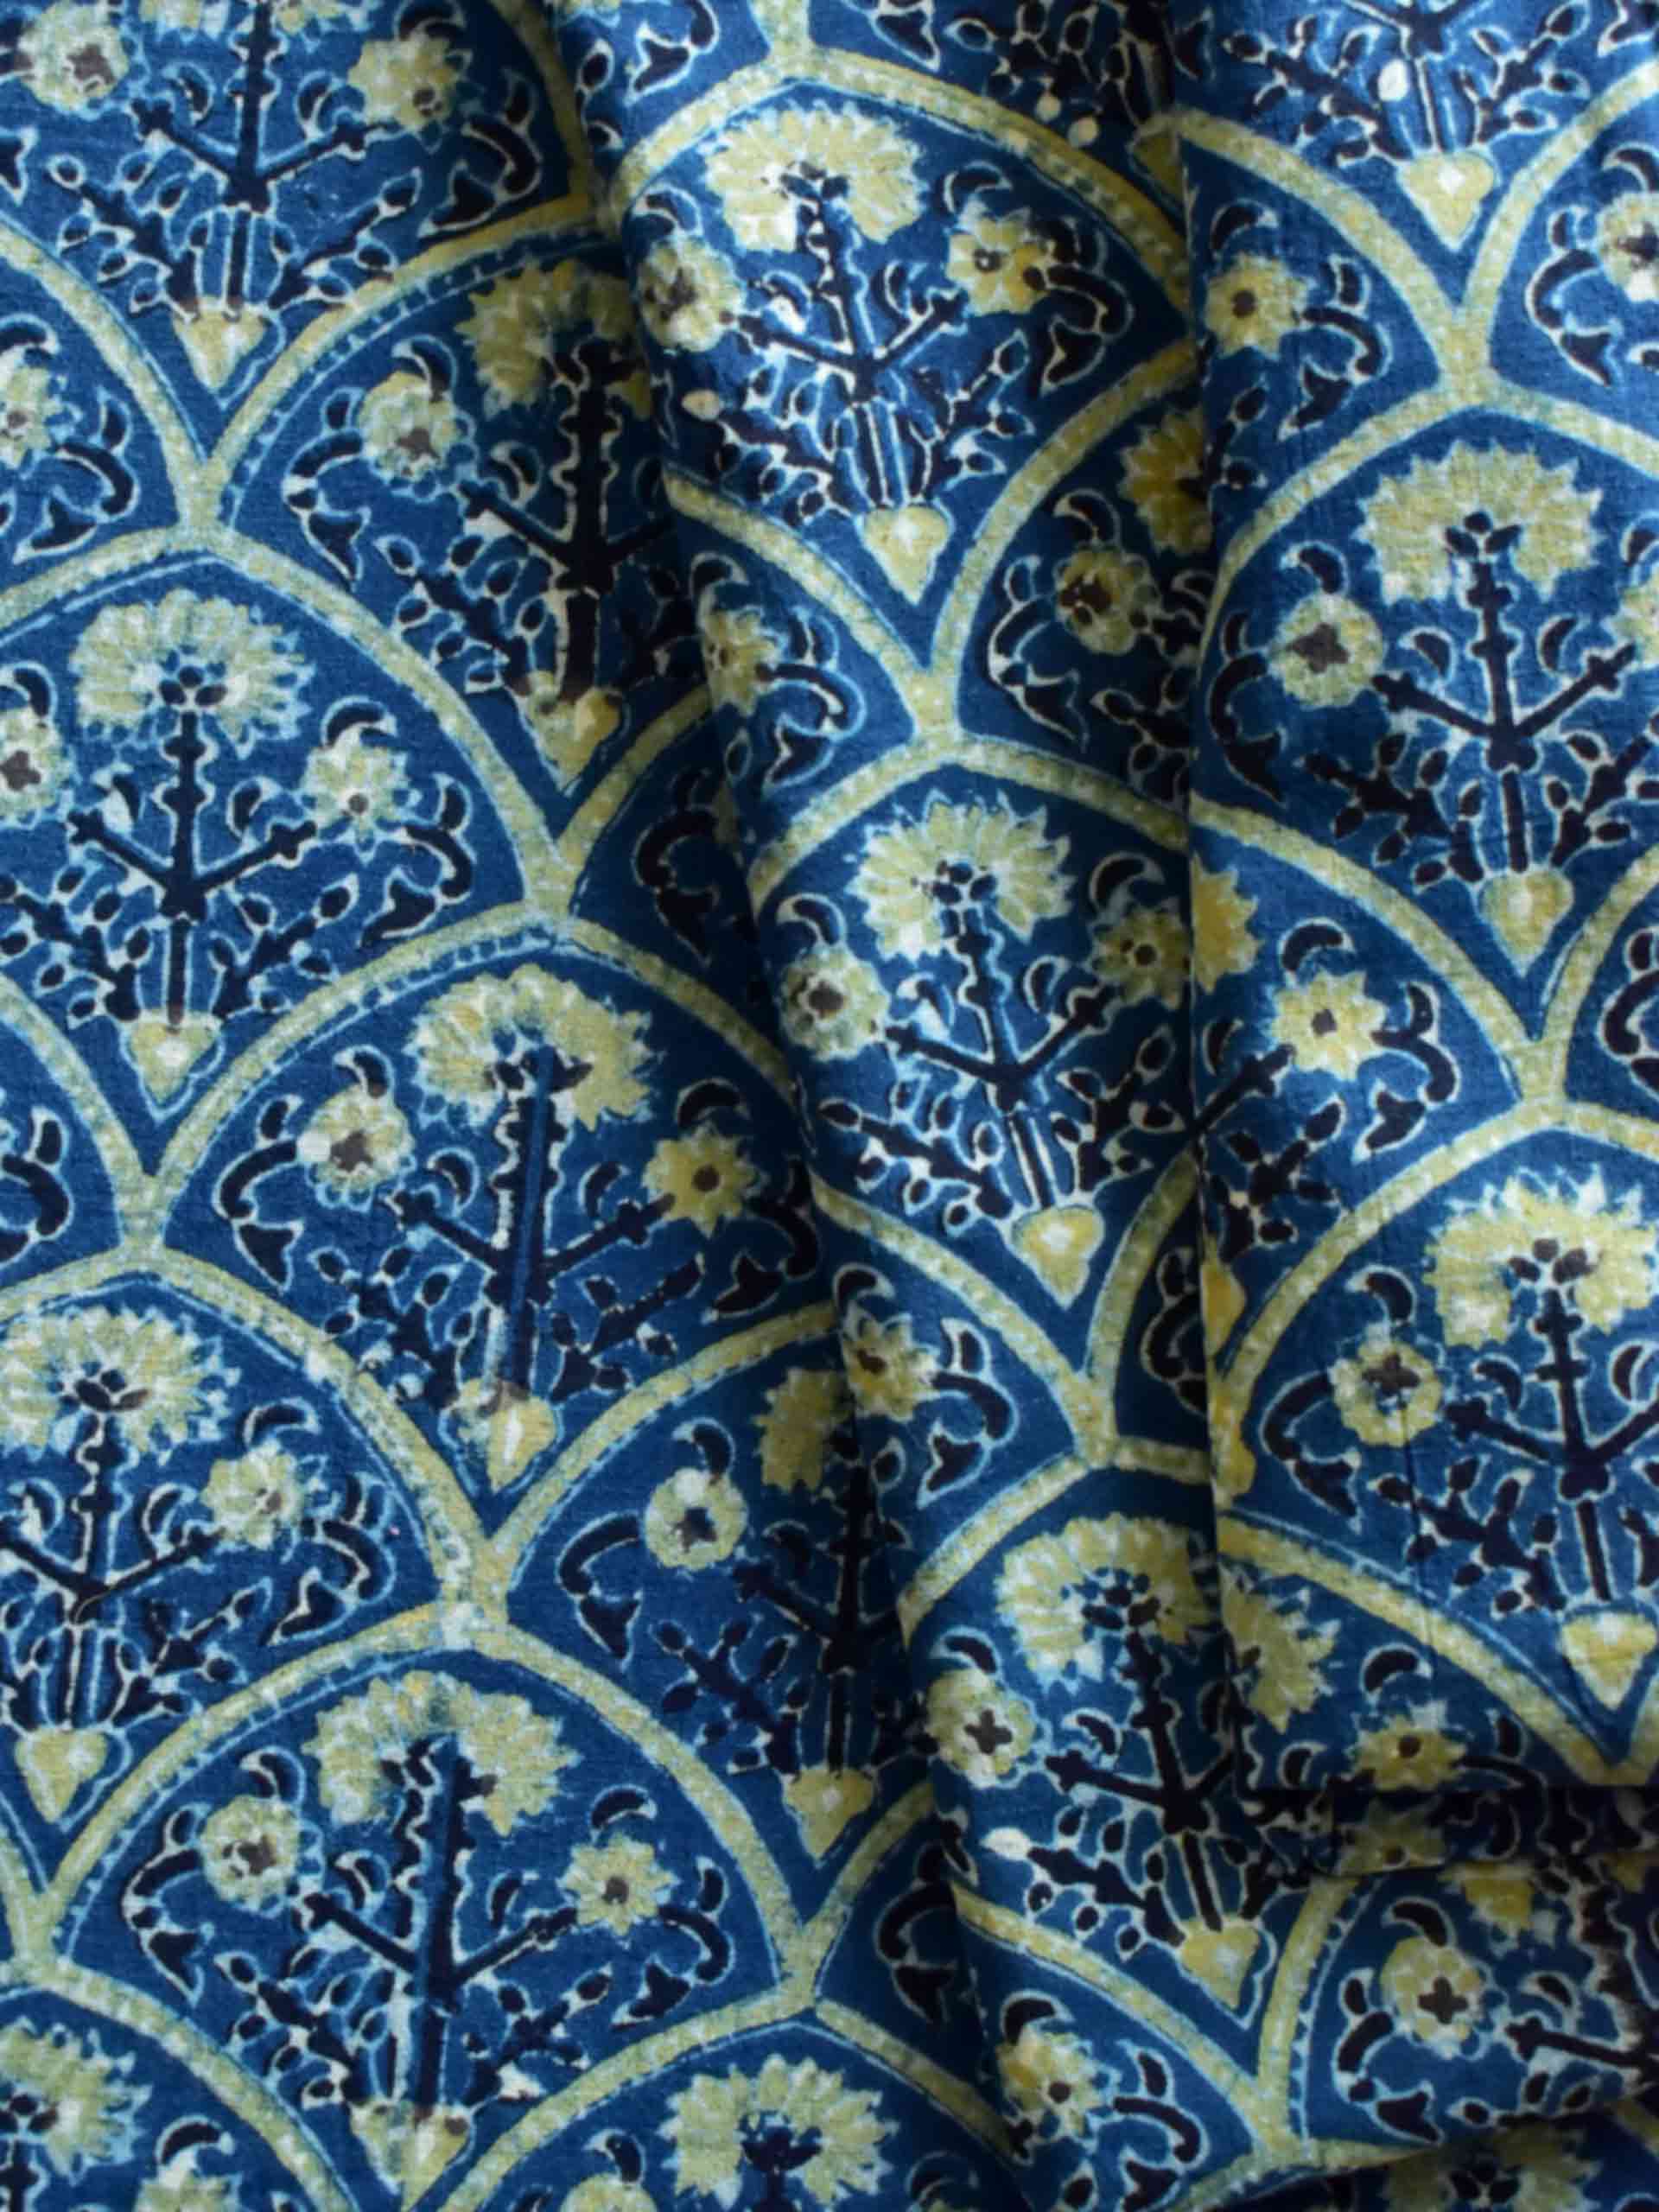 Olives - Hand block printed Cotton fabric 560 per meter